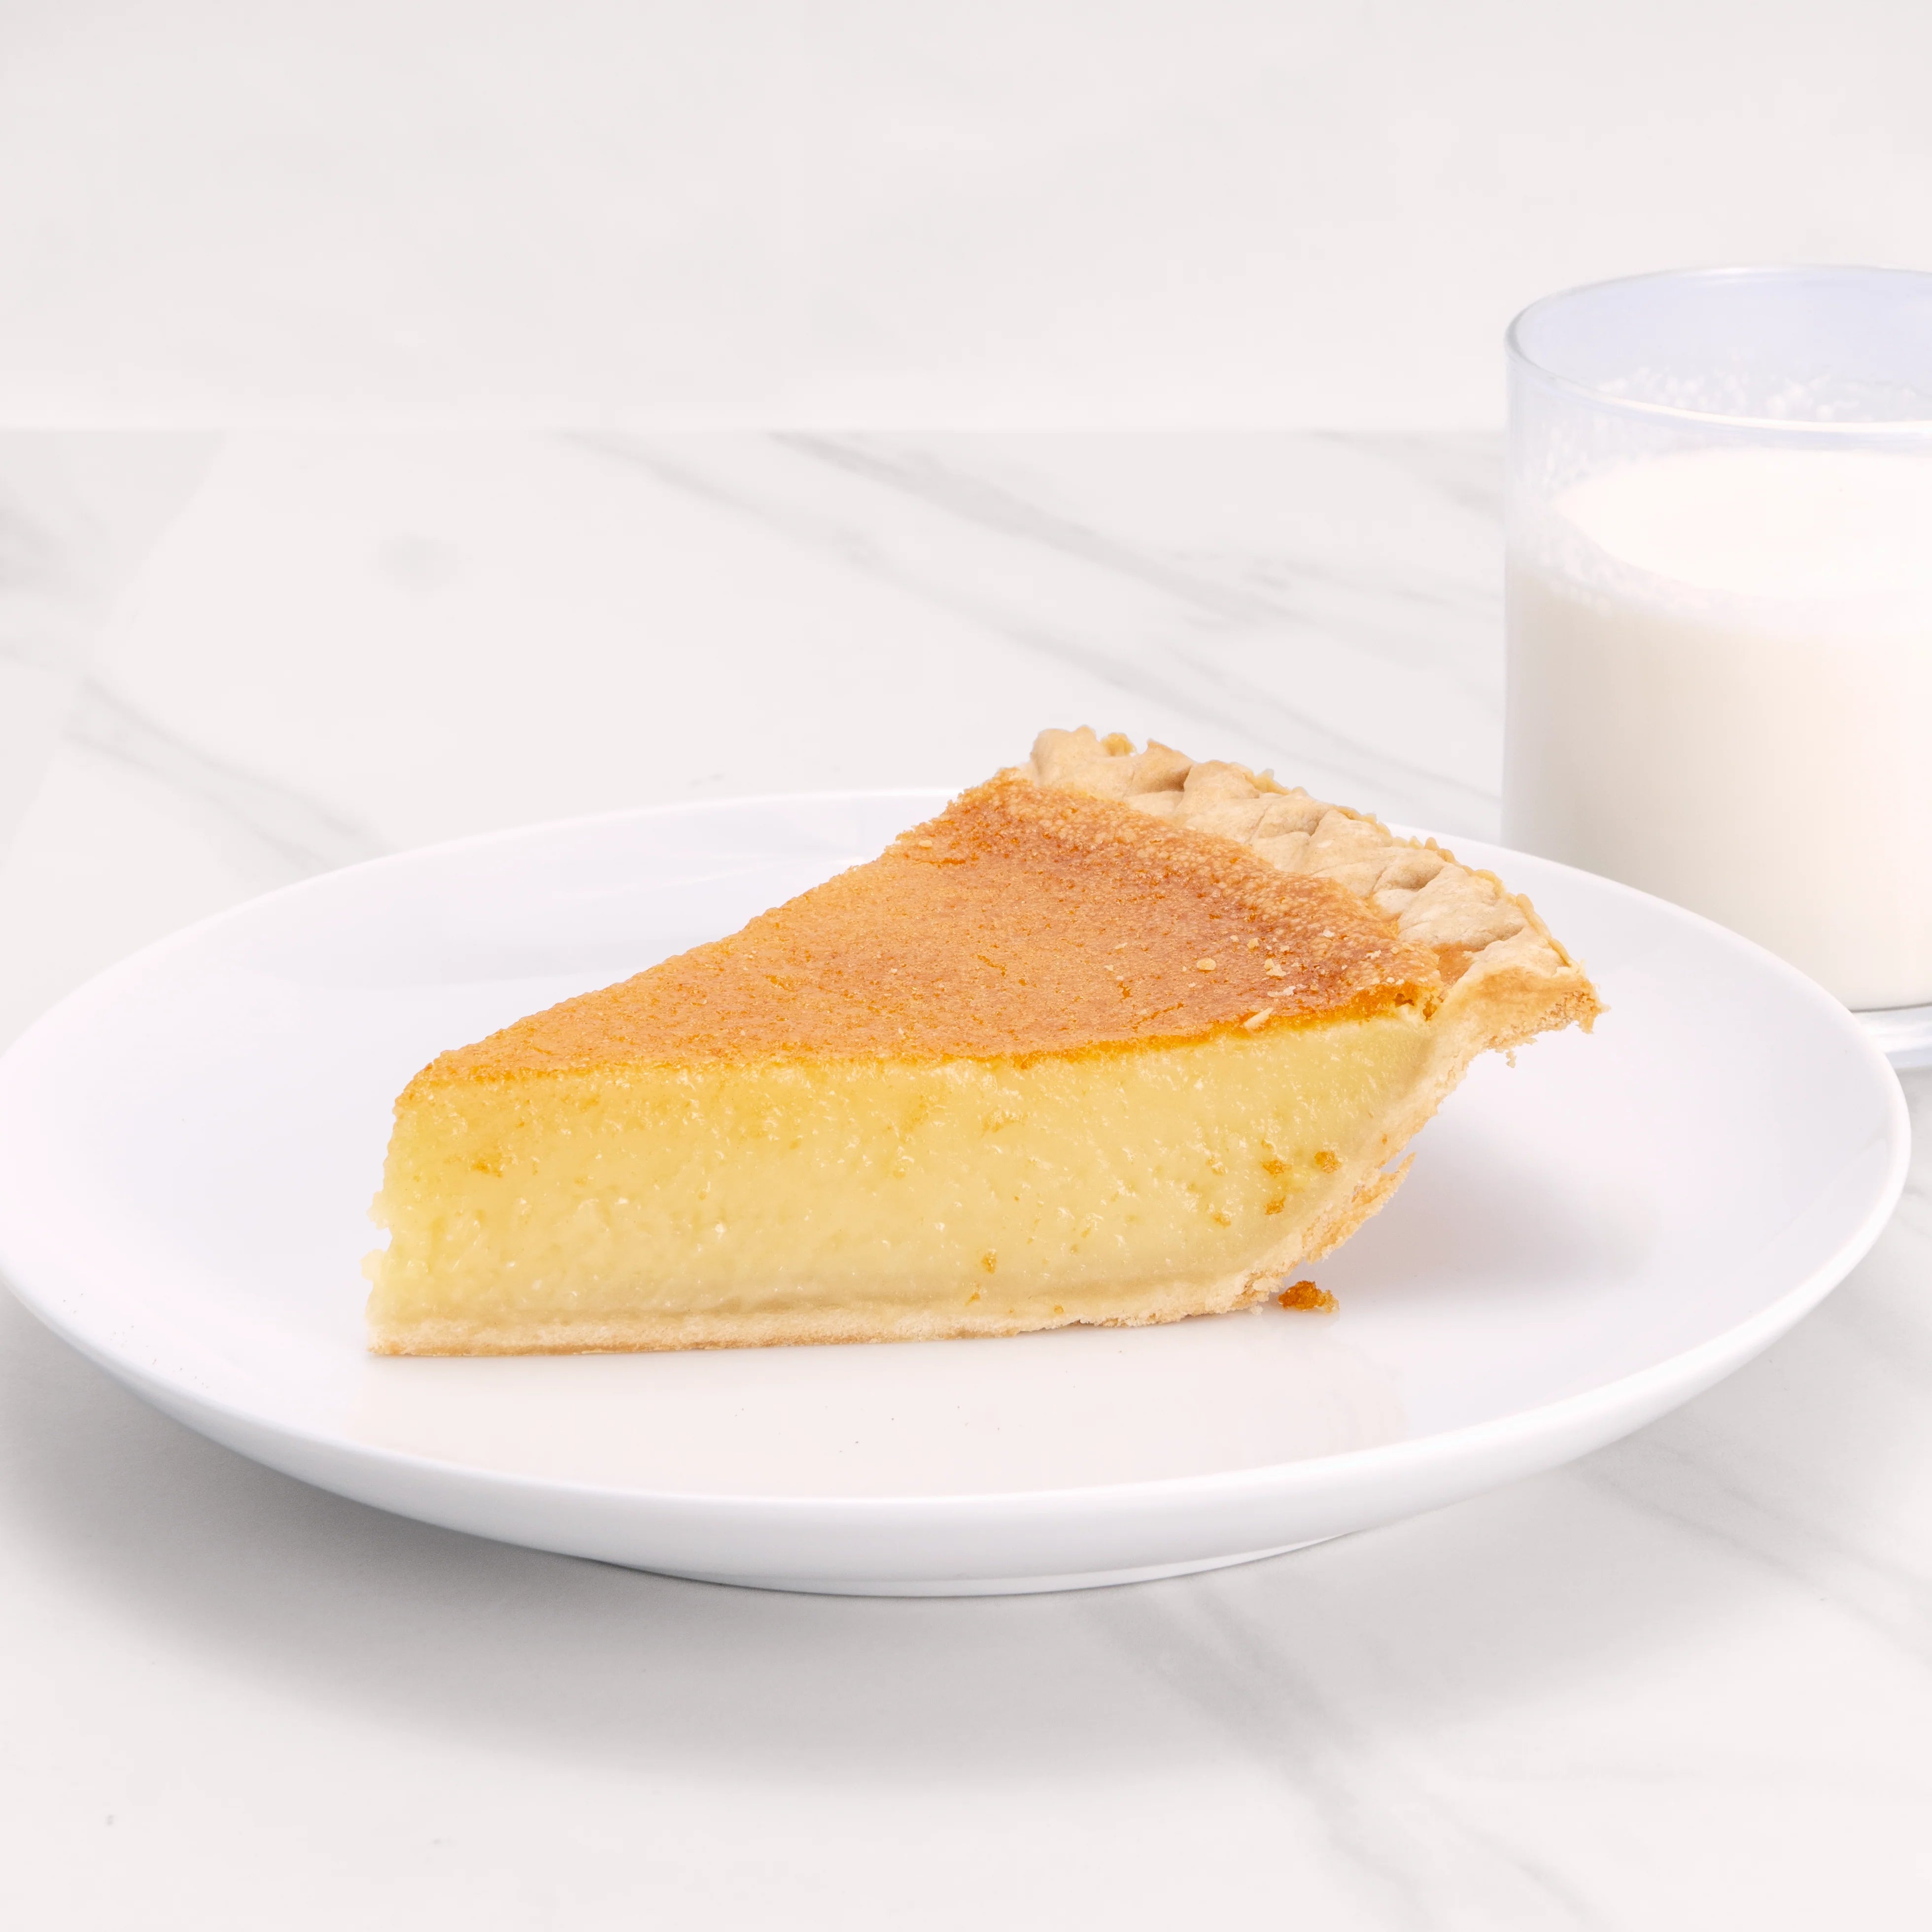 Slice of Buttermilk Chess pie with a glass of milk.